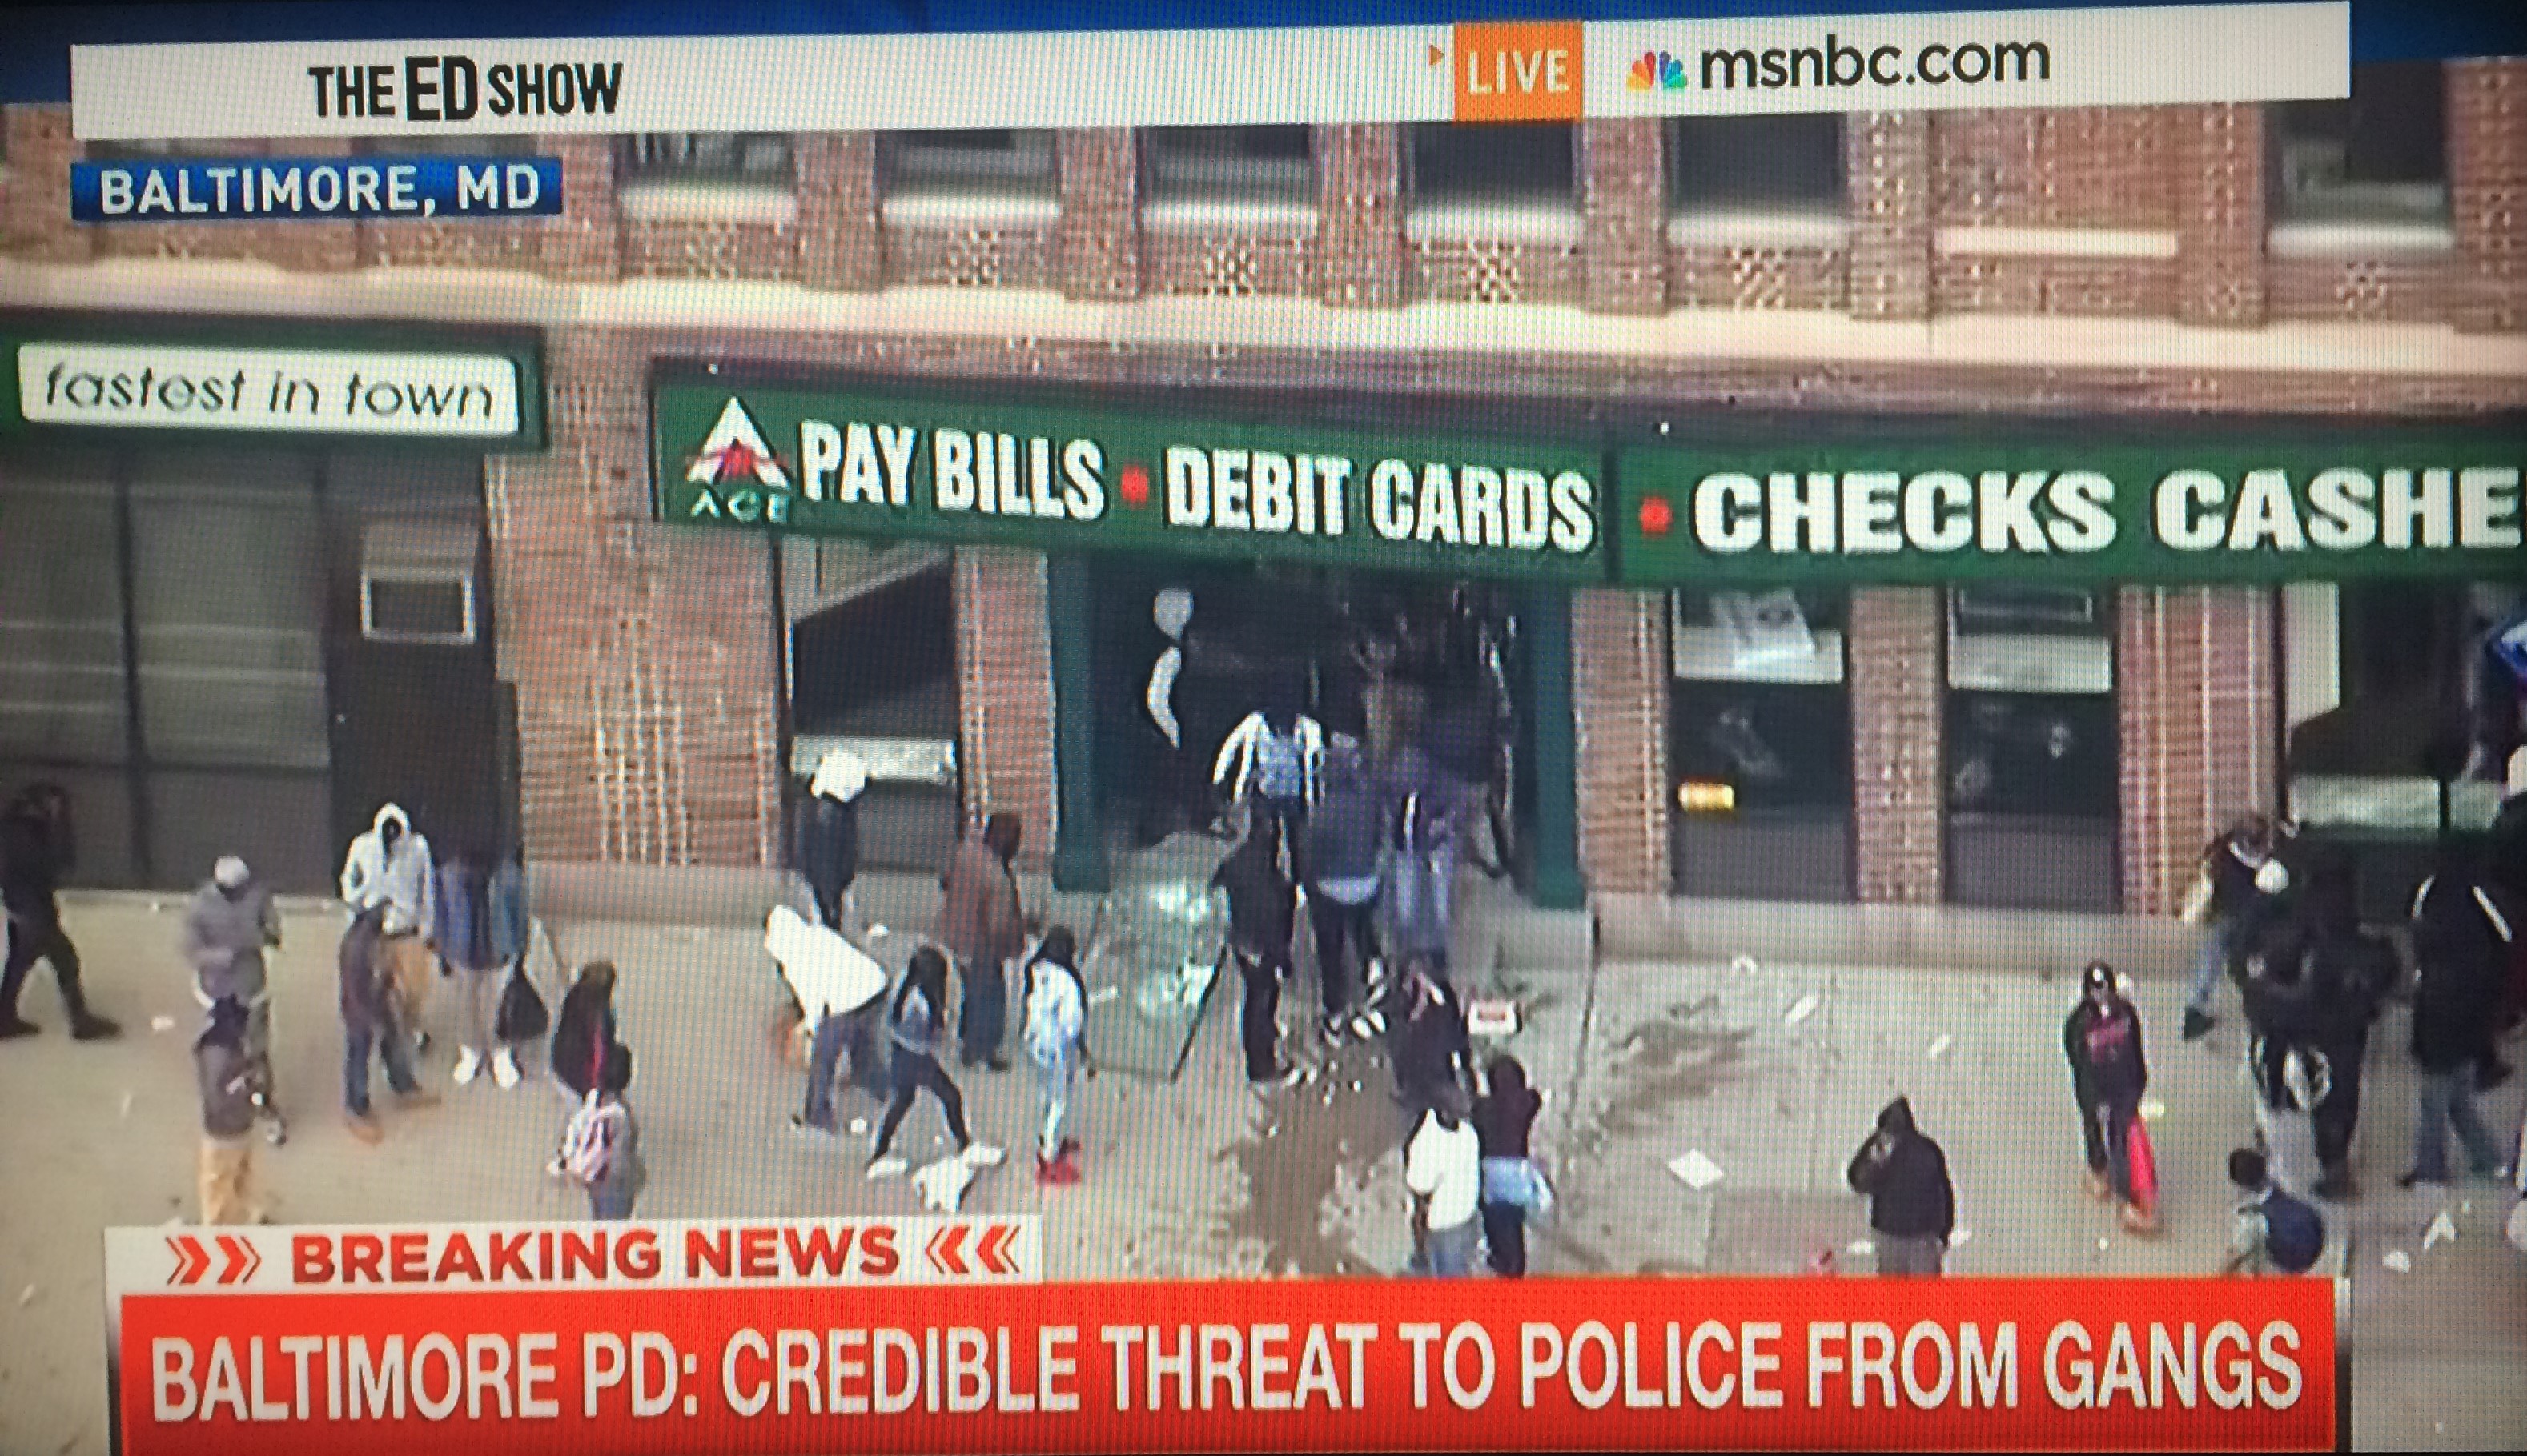 Baltimore Riots ACE Payday Loans Looting